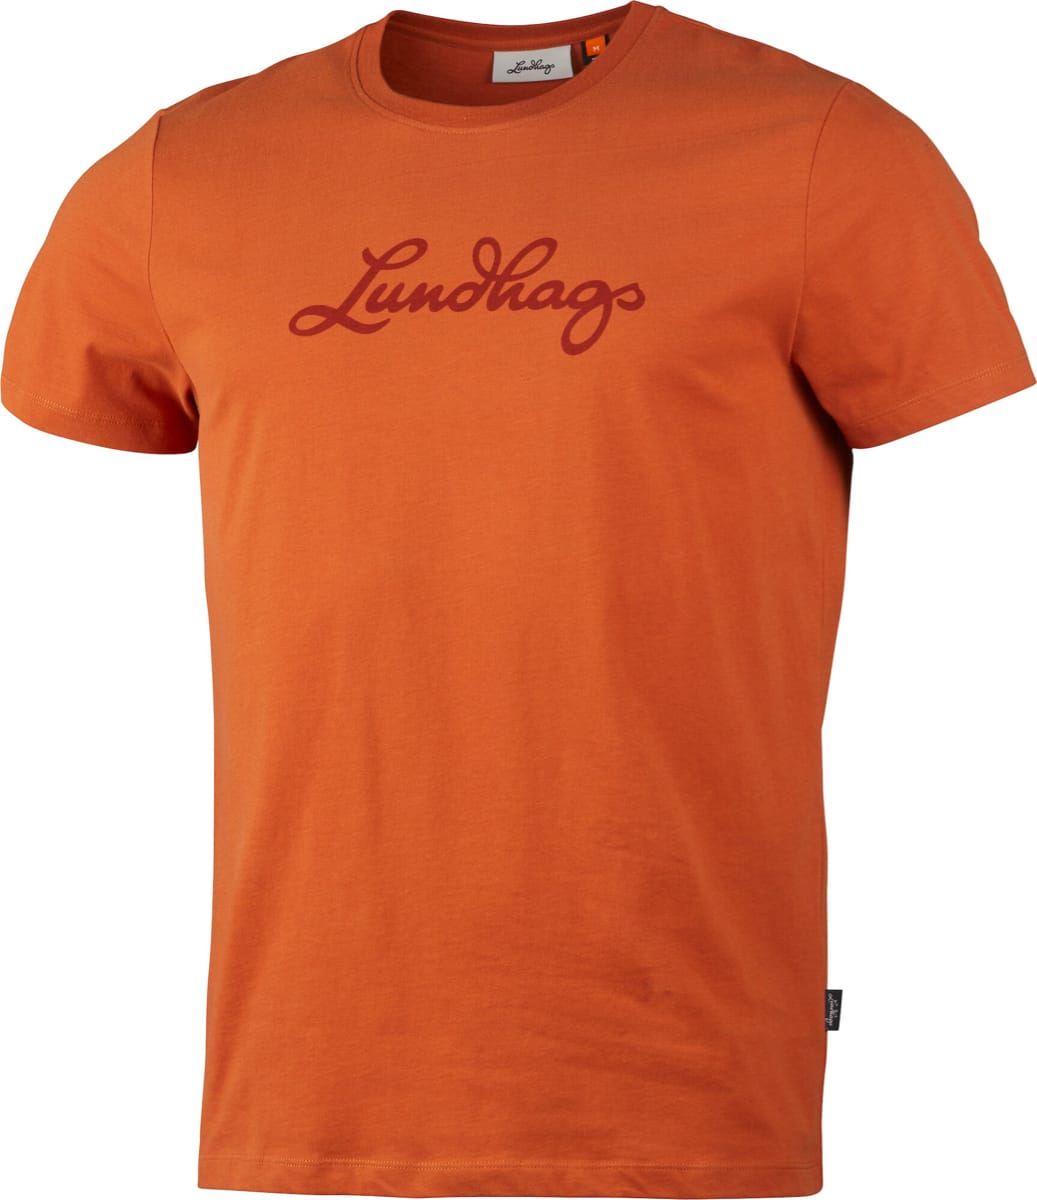 Lundhags Mens Tee Amber